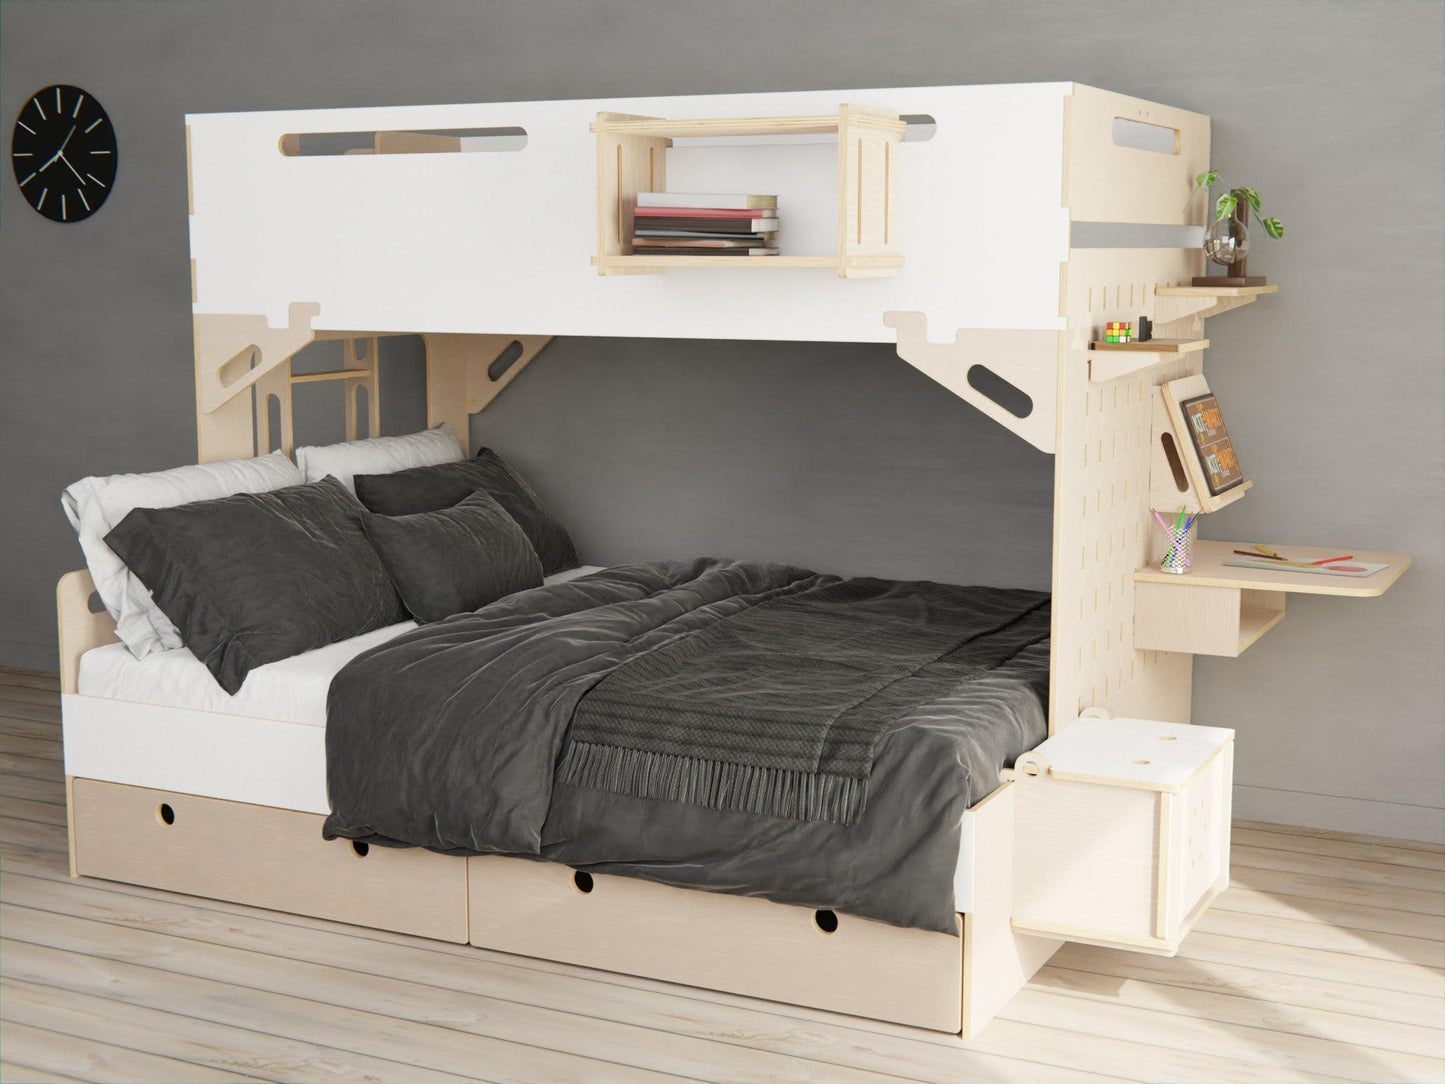 Triple the comfort with our plywood triple bunk beds. Perfect for family, complete with storage drawers.